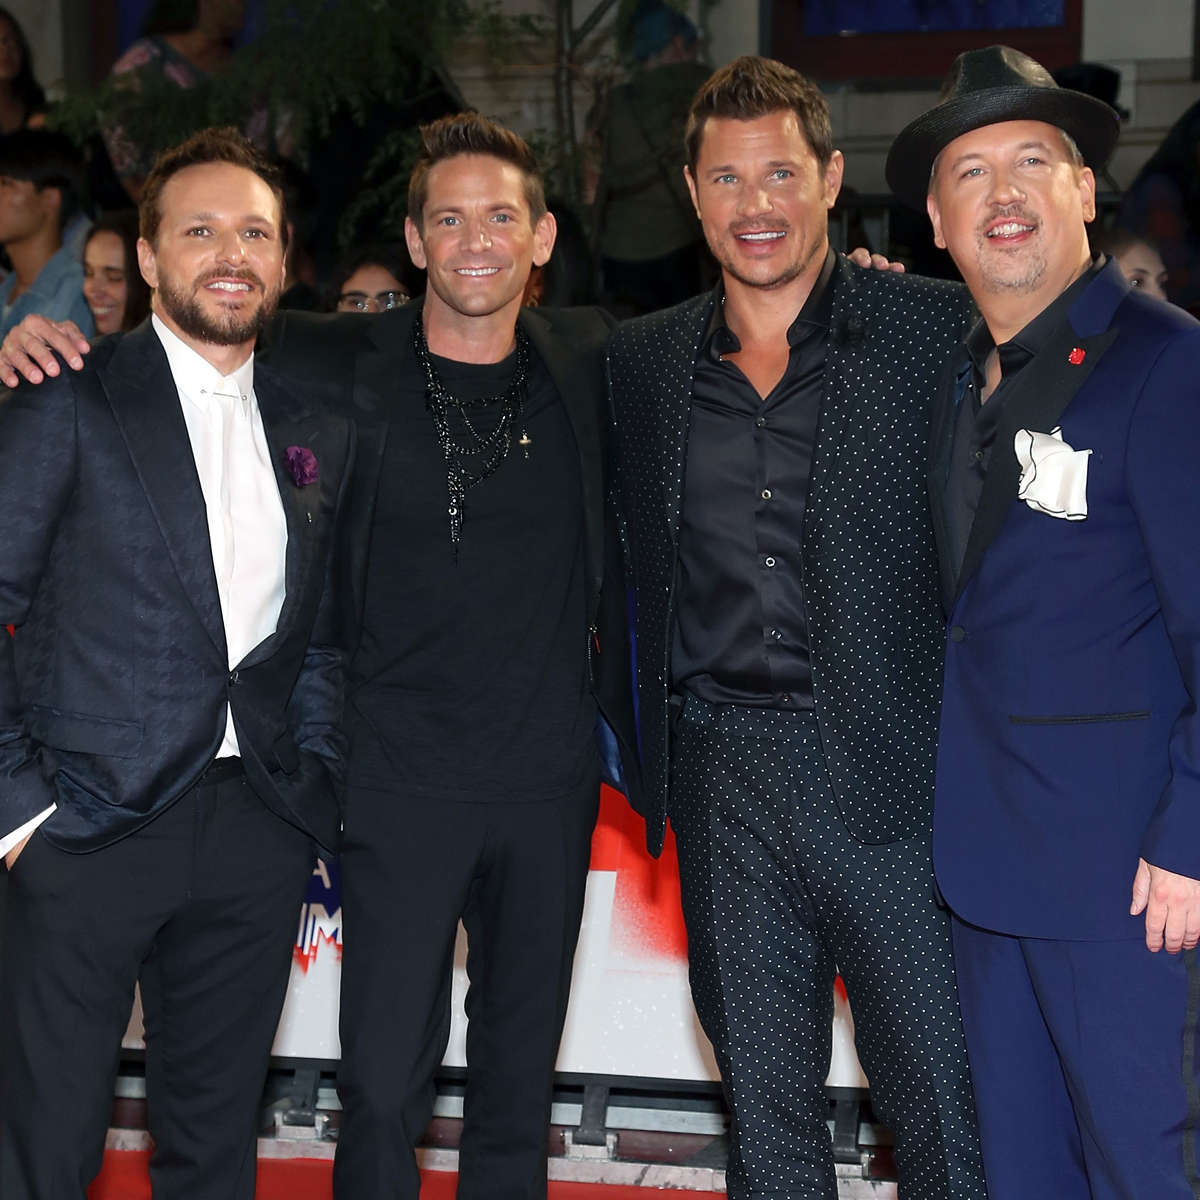 98 Degrees reveal their list of rejected band names